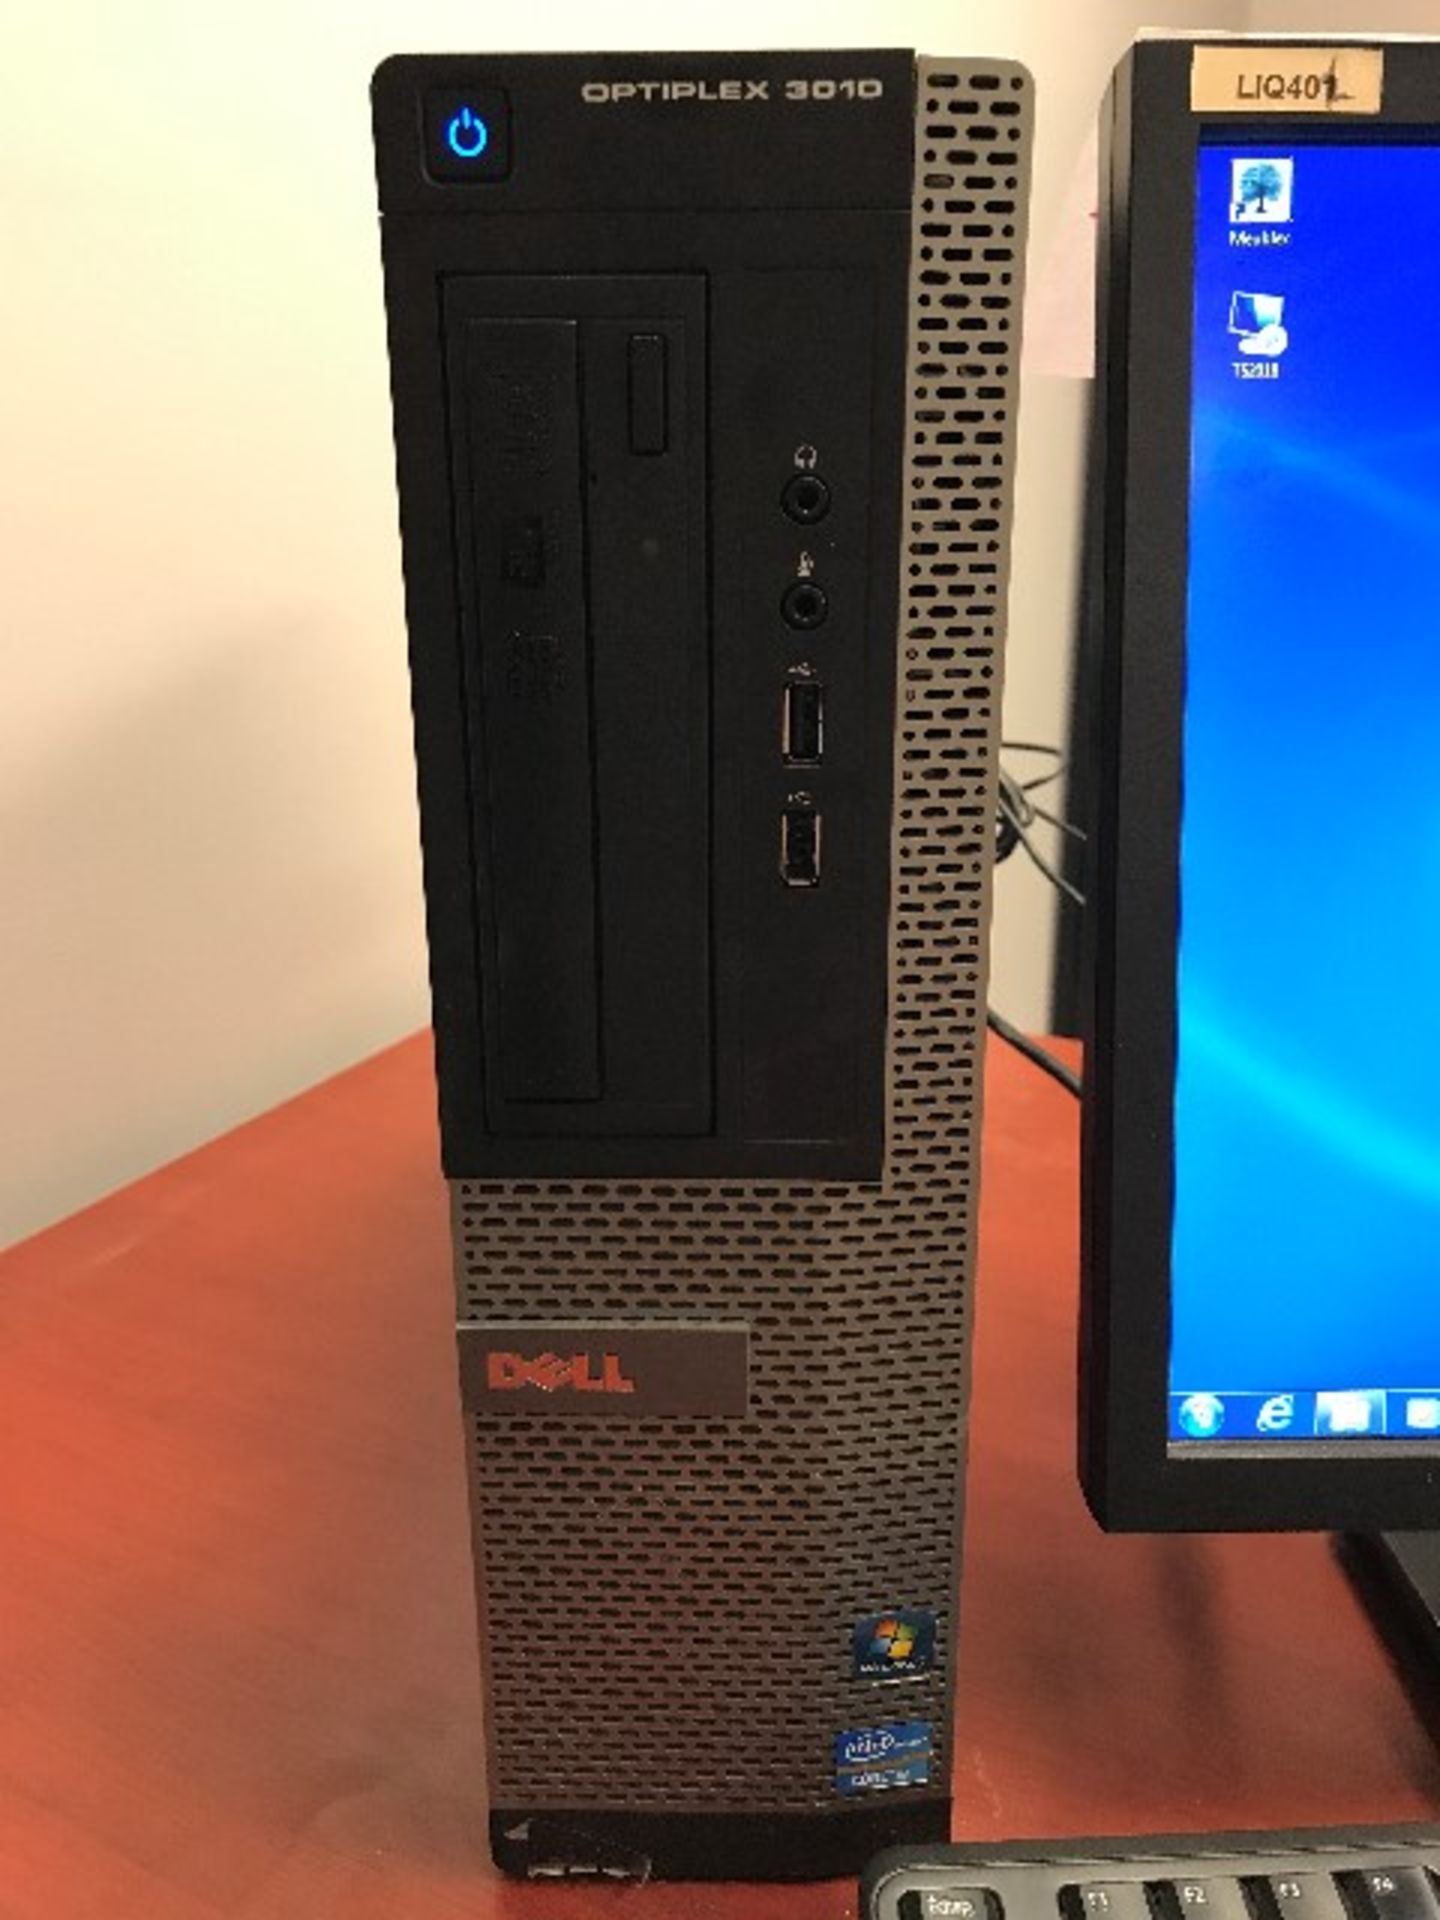 Dell i3,3.4GHz,4GB RAM,450GB HDD,monitor,keyboard,mouse - Image 2 of 3